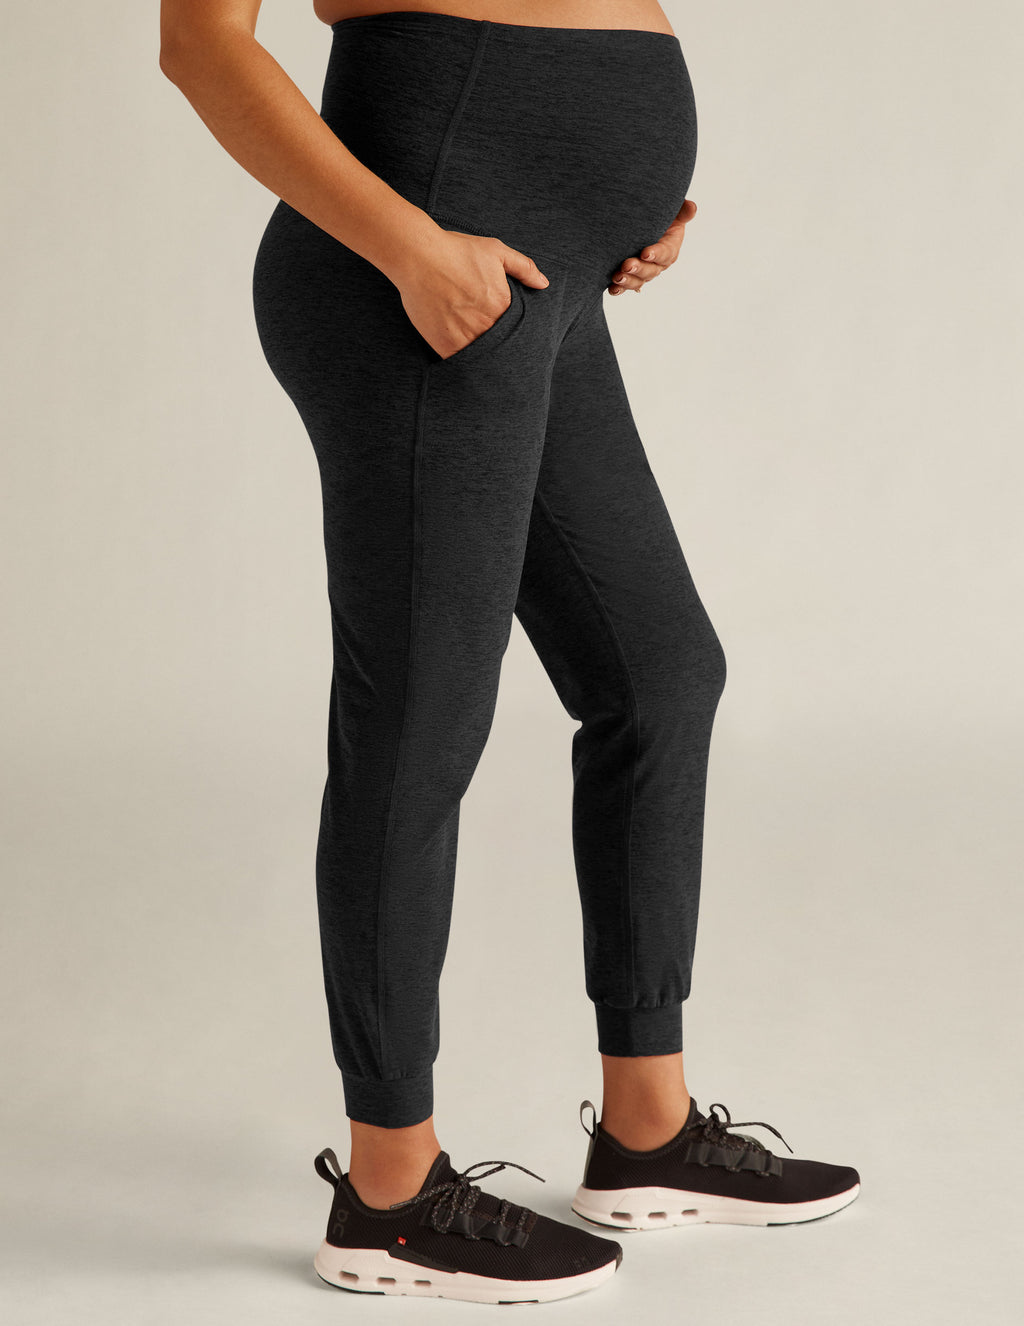 HEGALY Women's Maternity Flare Leggings Over The Belly - Casual Pregnancy Yoga  Pants with Pockets Buttery Soft Black at  Women's Clothing store